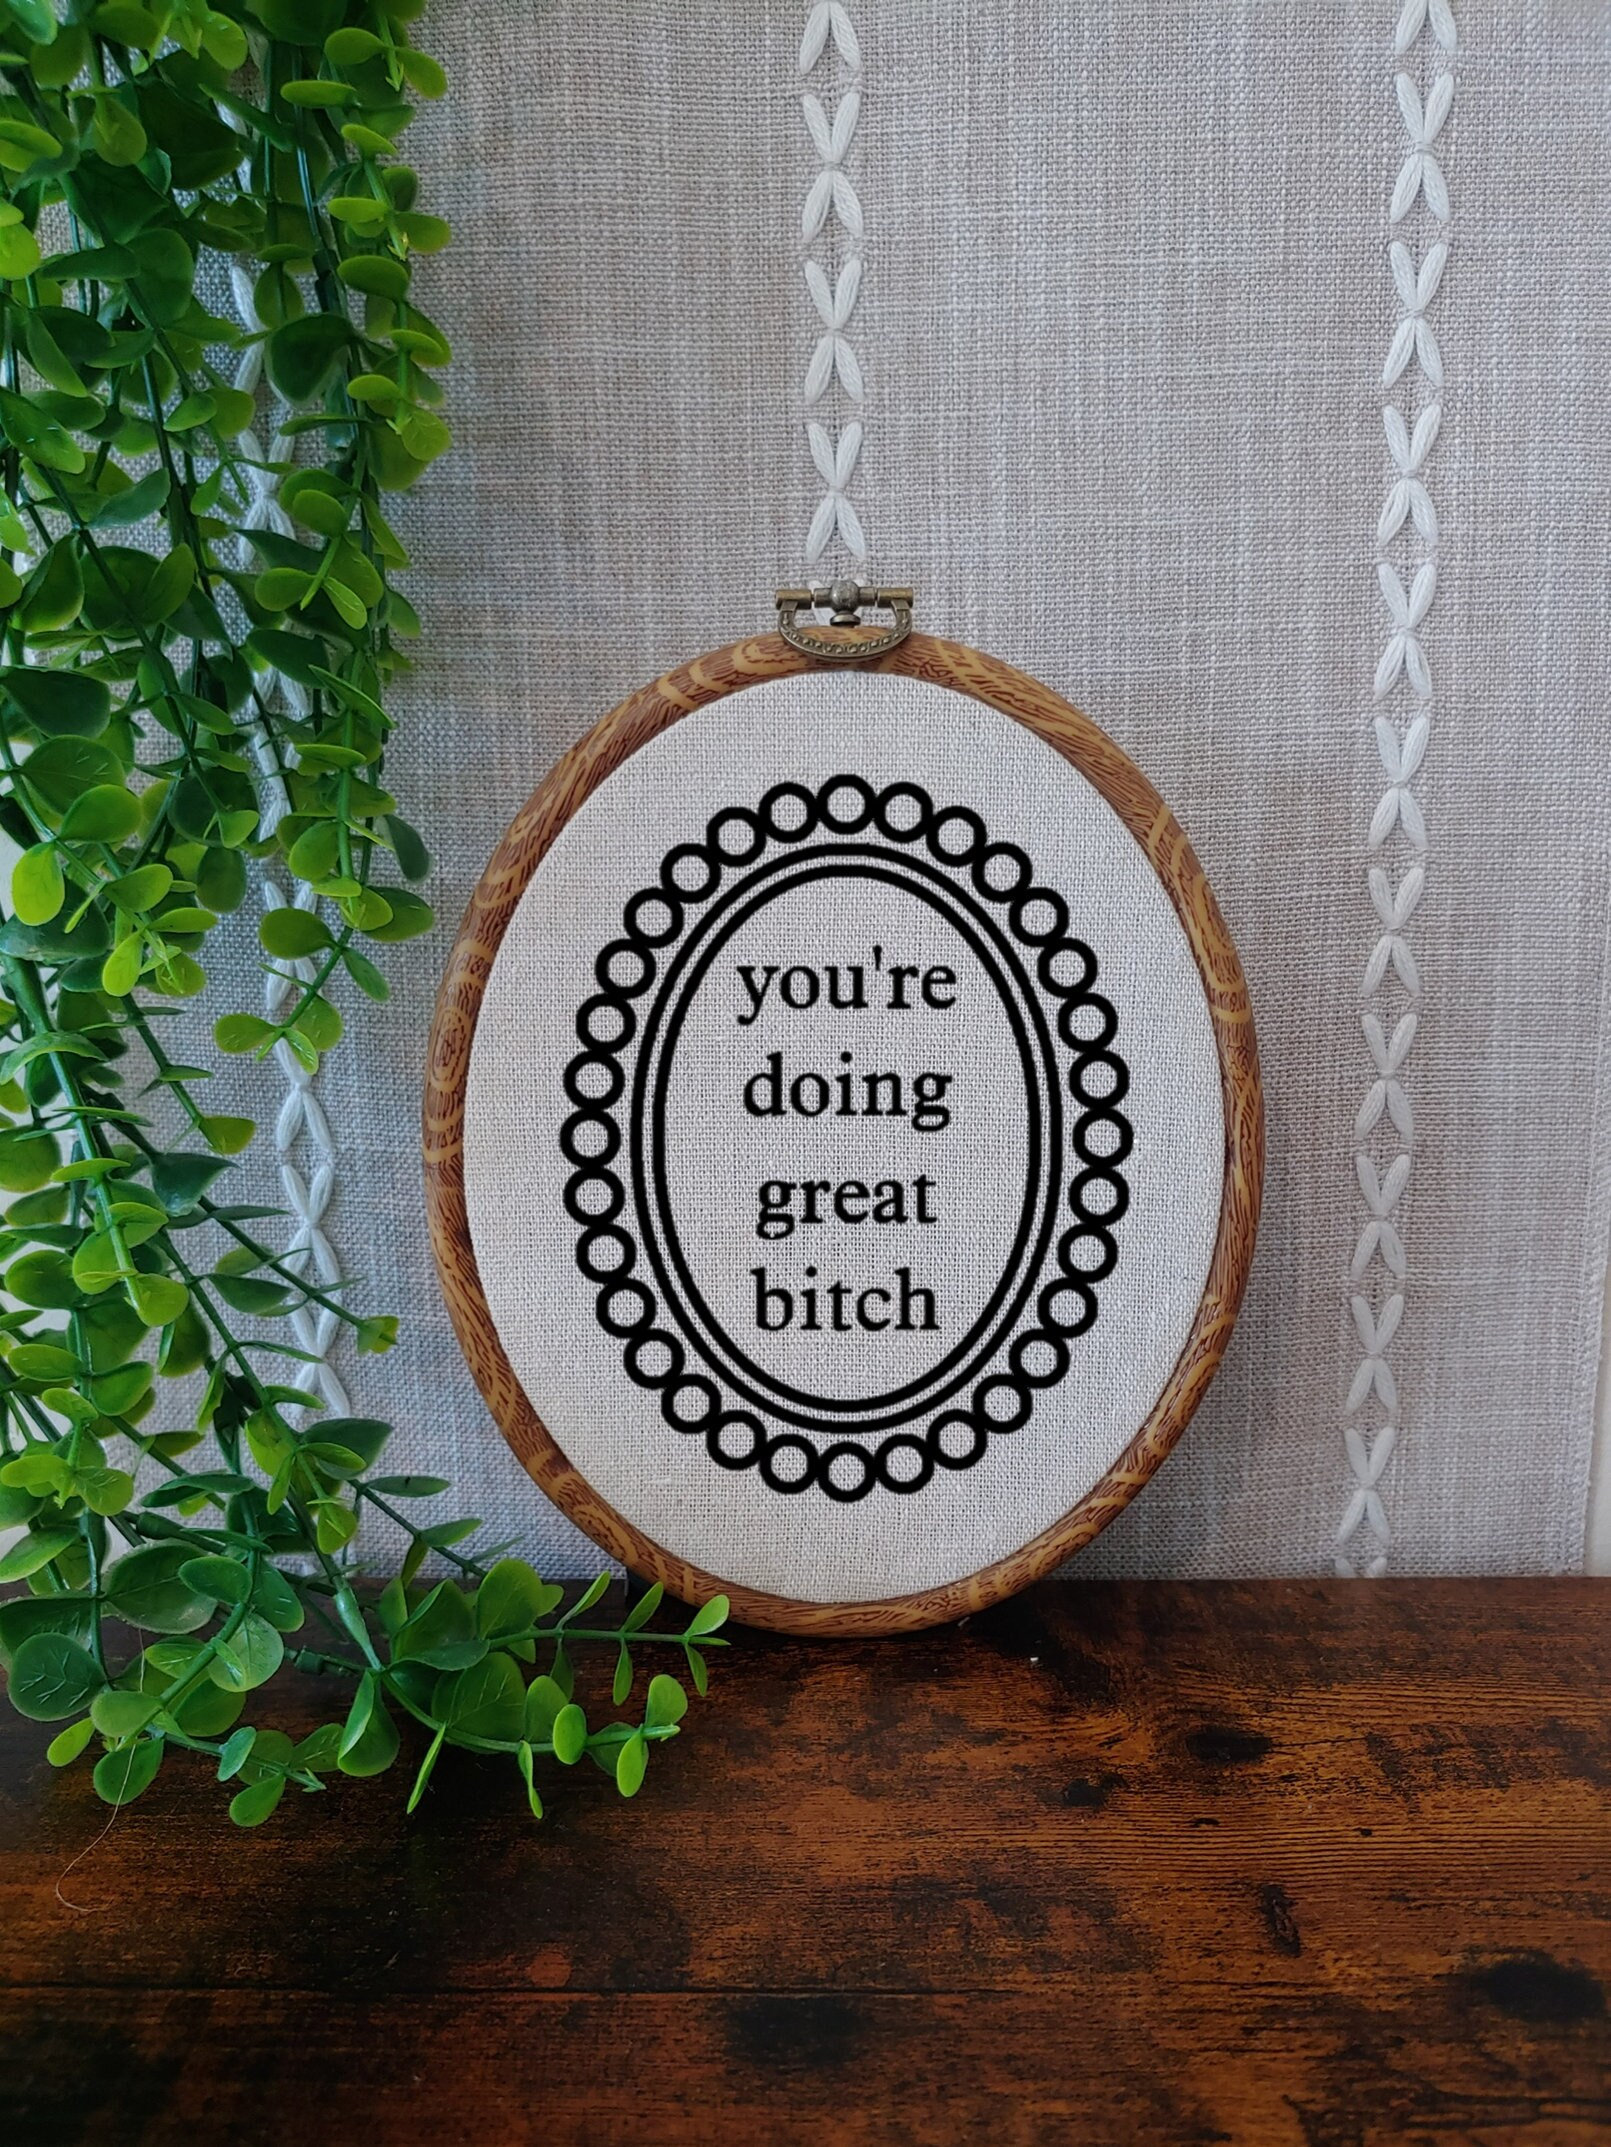 ✨Funny Hand Embroidery Home Decor